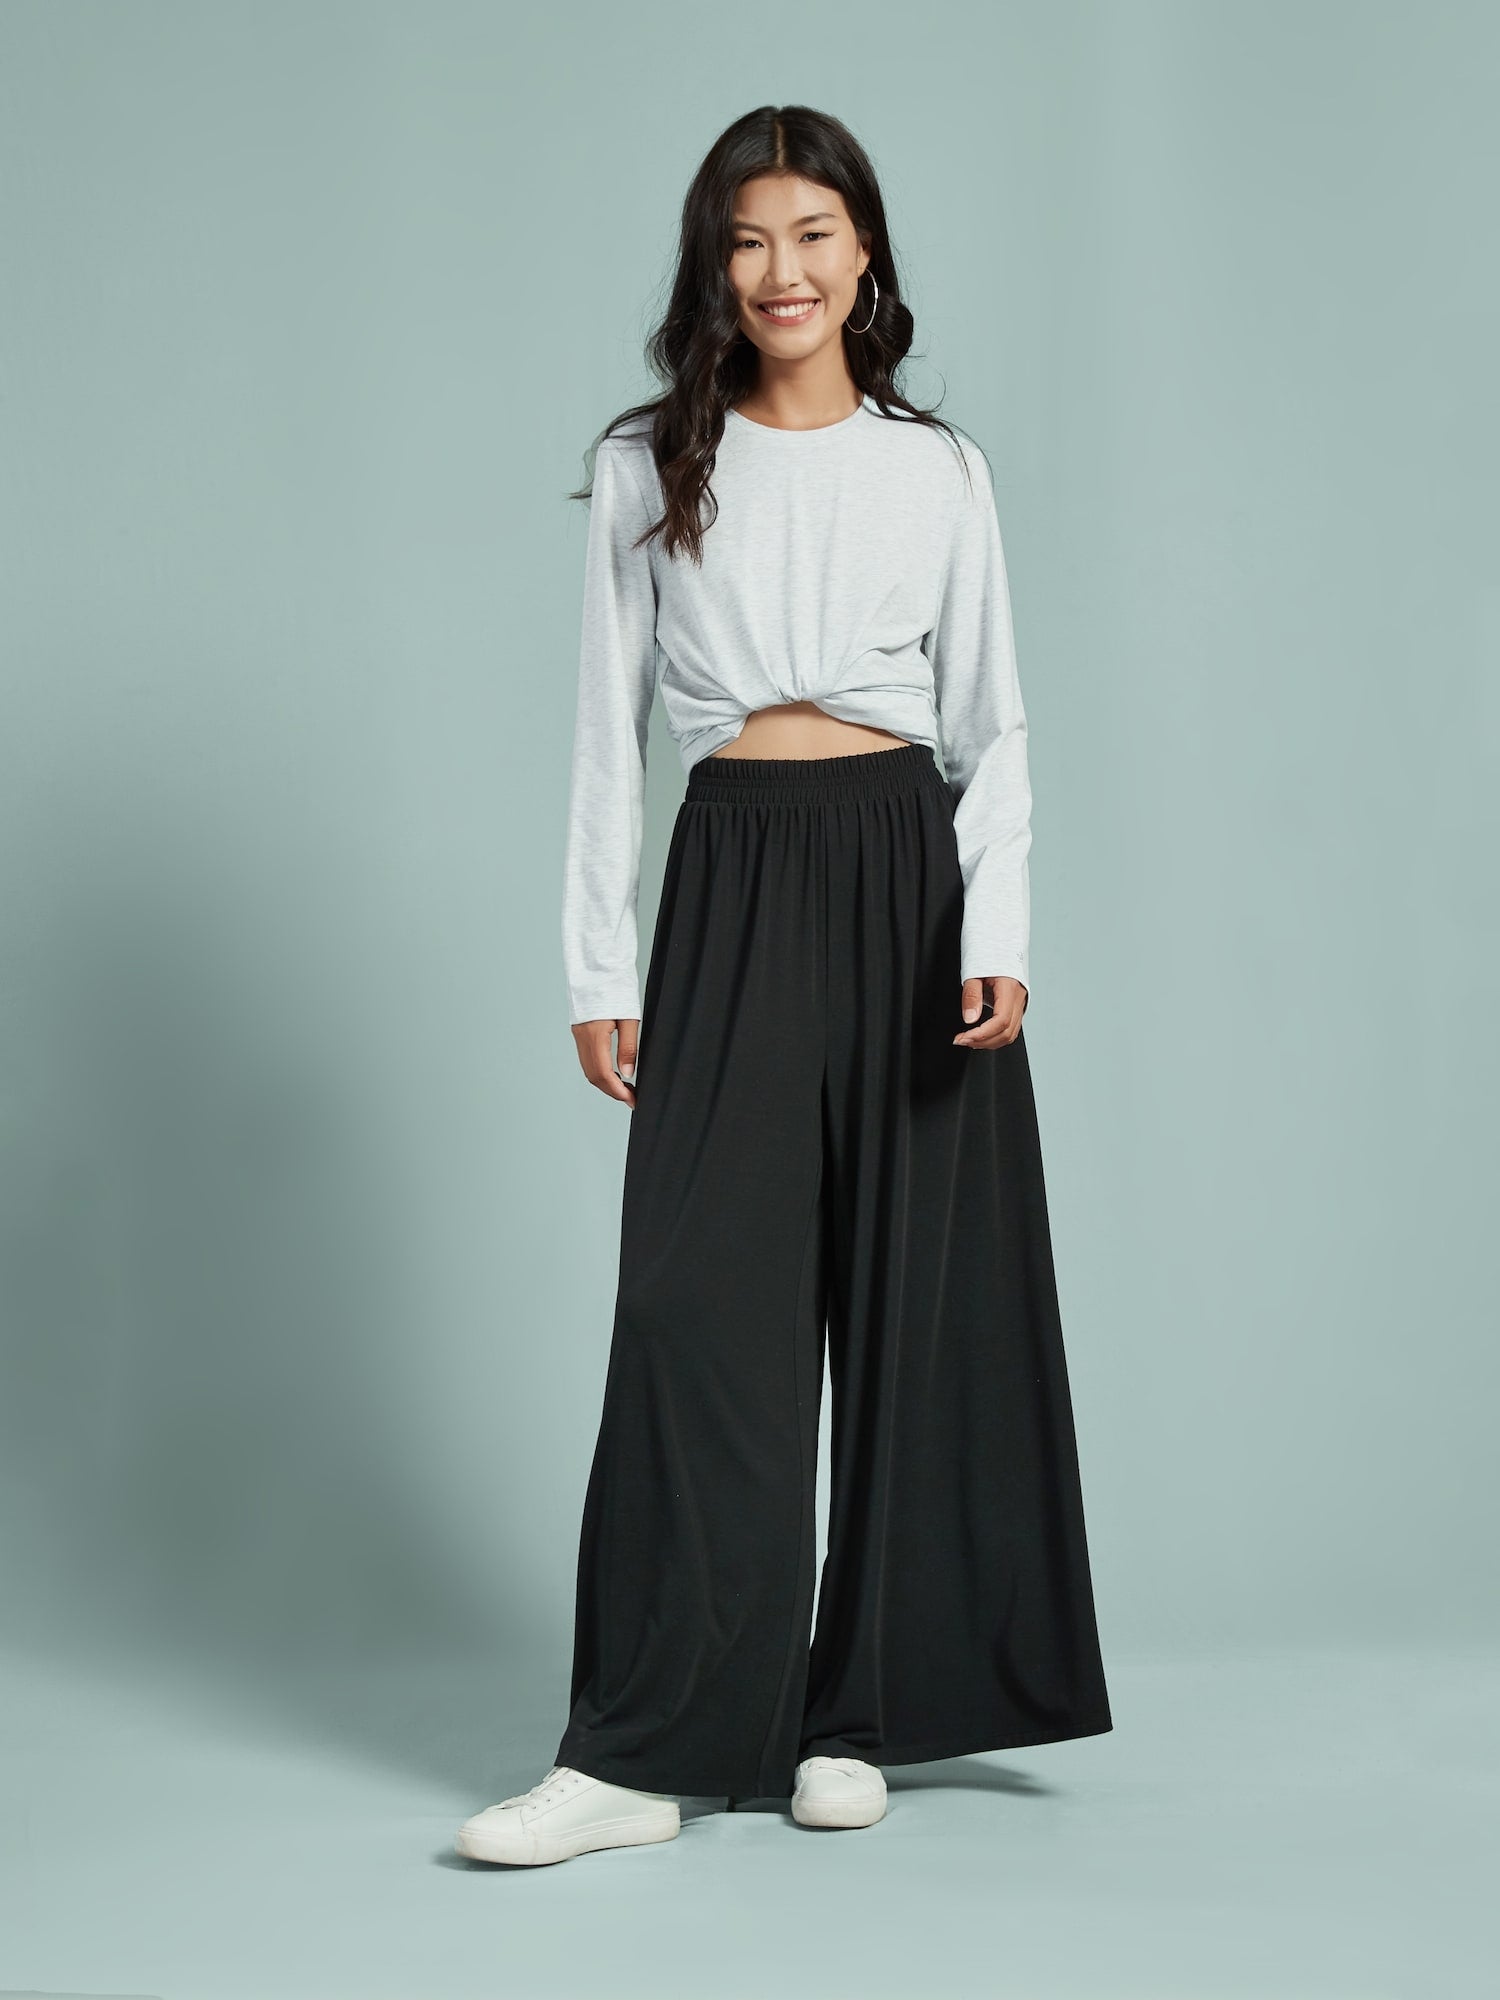 FLOWY Pants, Extra Soft, Extra Wide Palazzo Pants